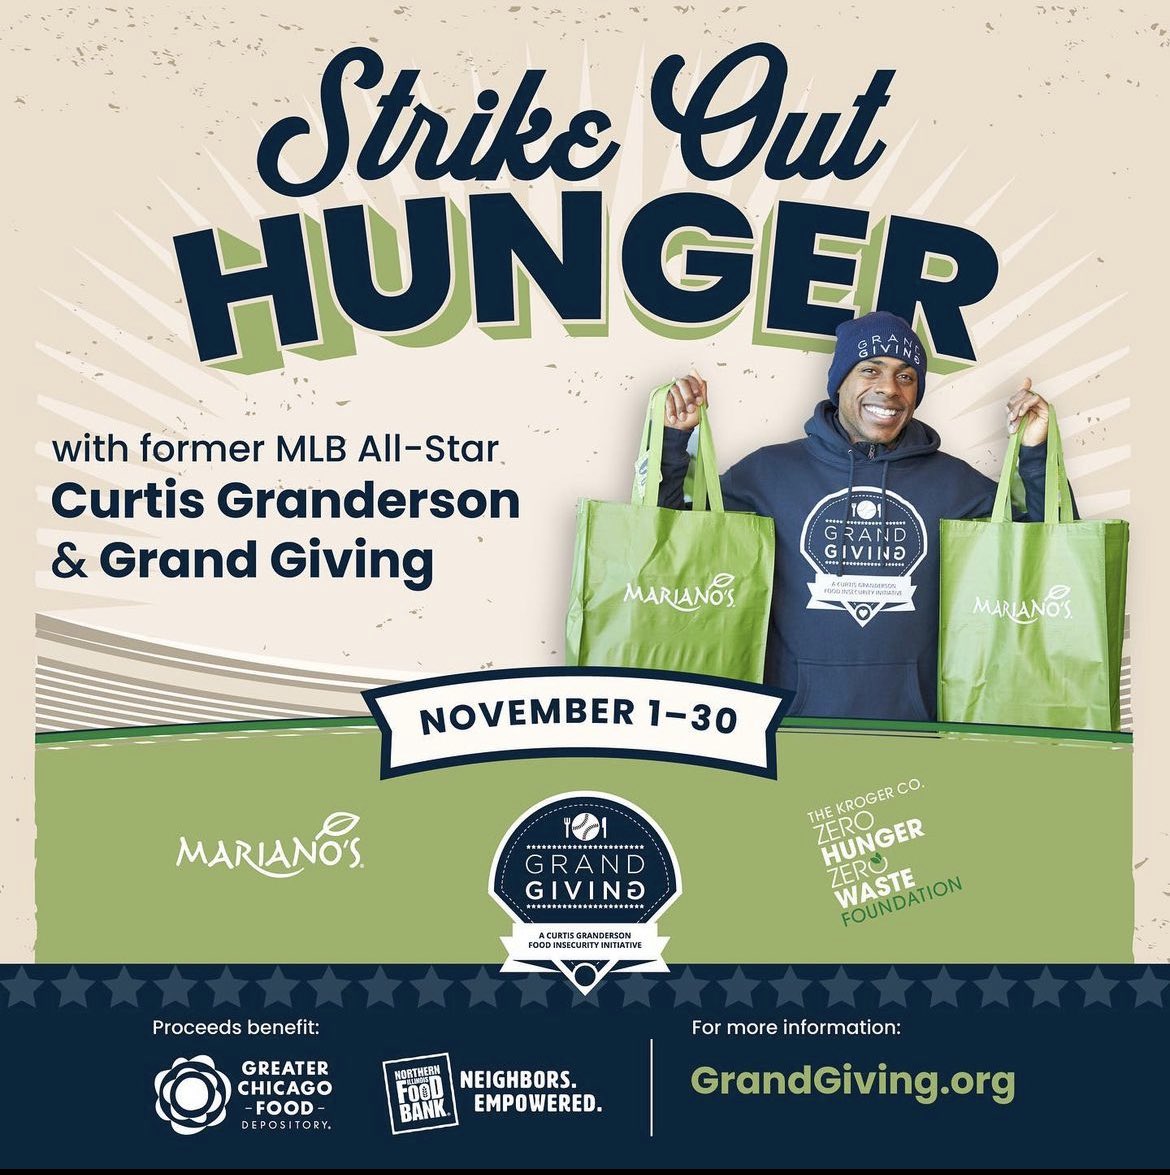 Our annual Grand Giving is happening again the entire month of November. If you are in Chicago go to any @MarianosMarket location to donate. If you are not in Chicago and would like to donate go to GrandGiving.org. Thanks for all the support to help Strike Out Hunger